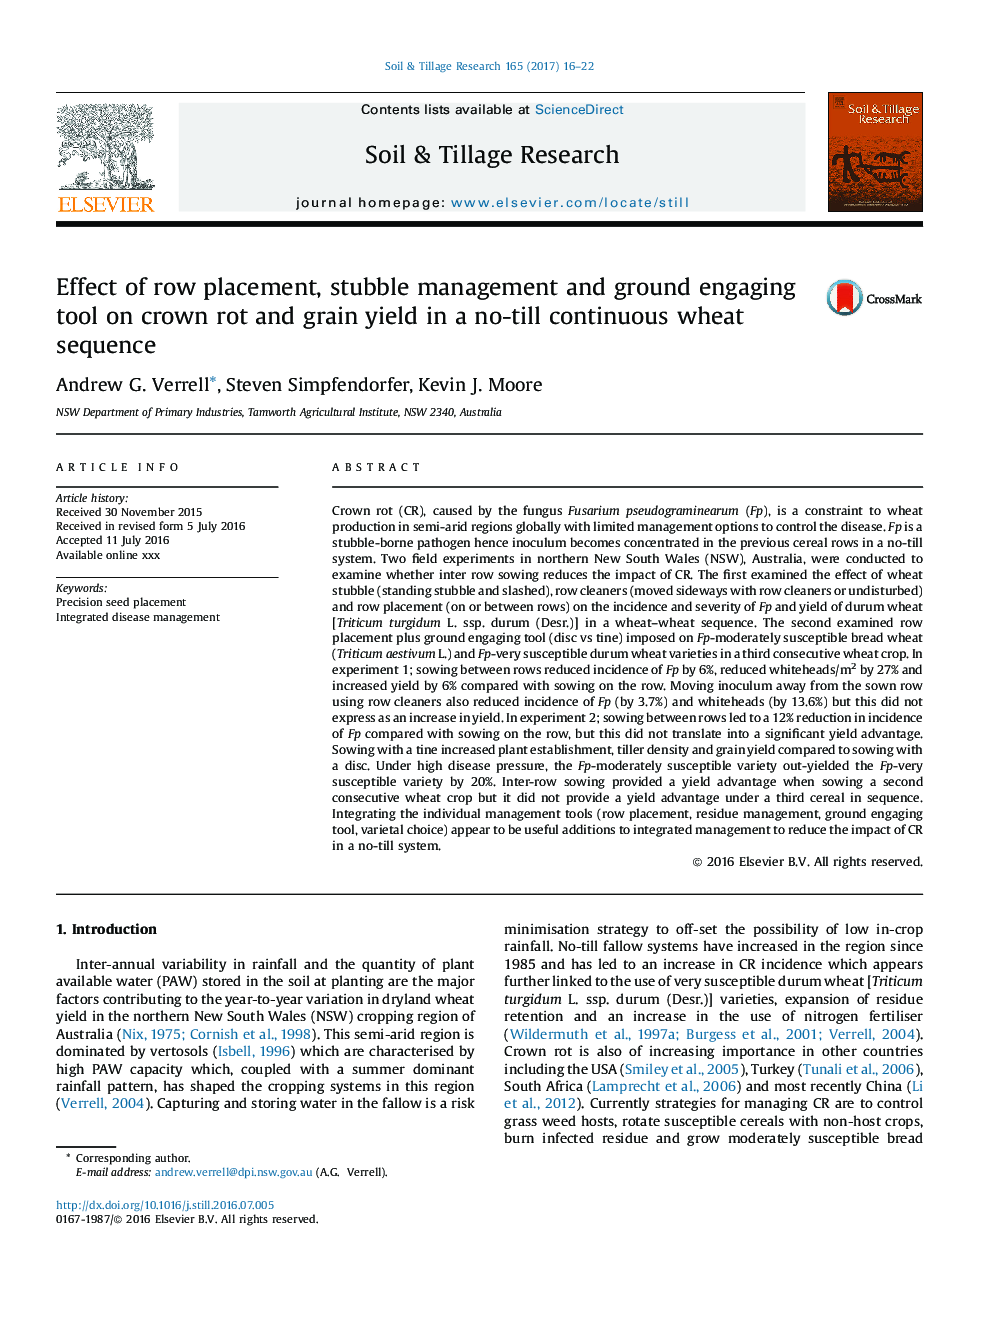 Effect of row placement, stubble management and ground engaging tool on crown rot and grain yield in a no-till continuous wheat sequence